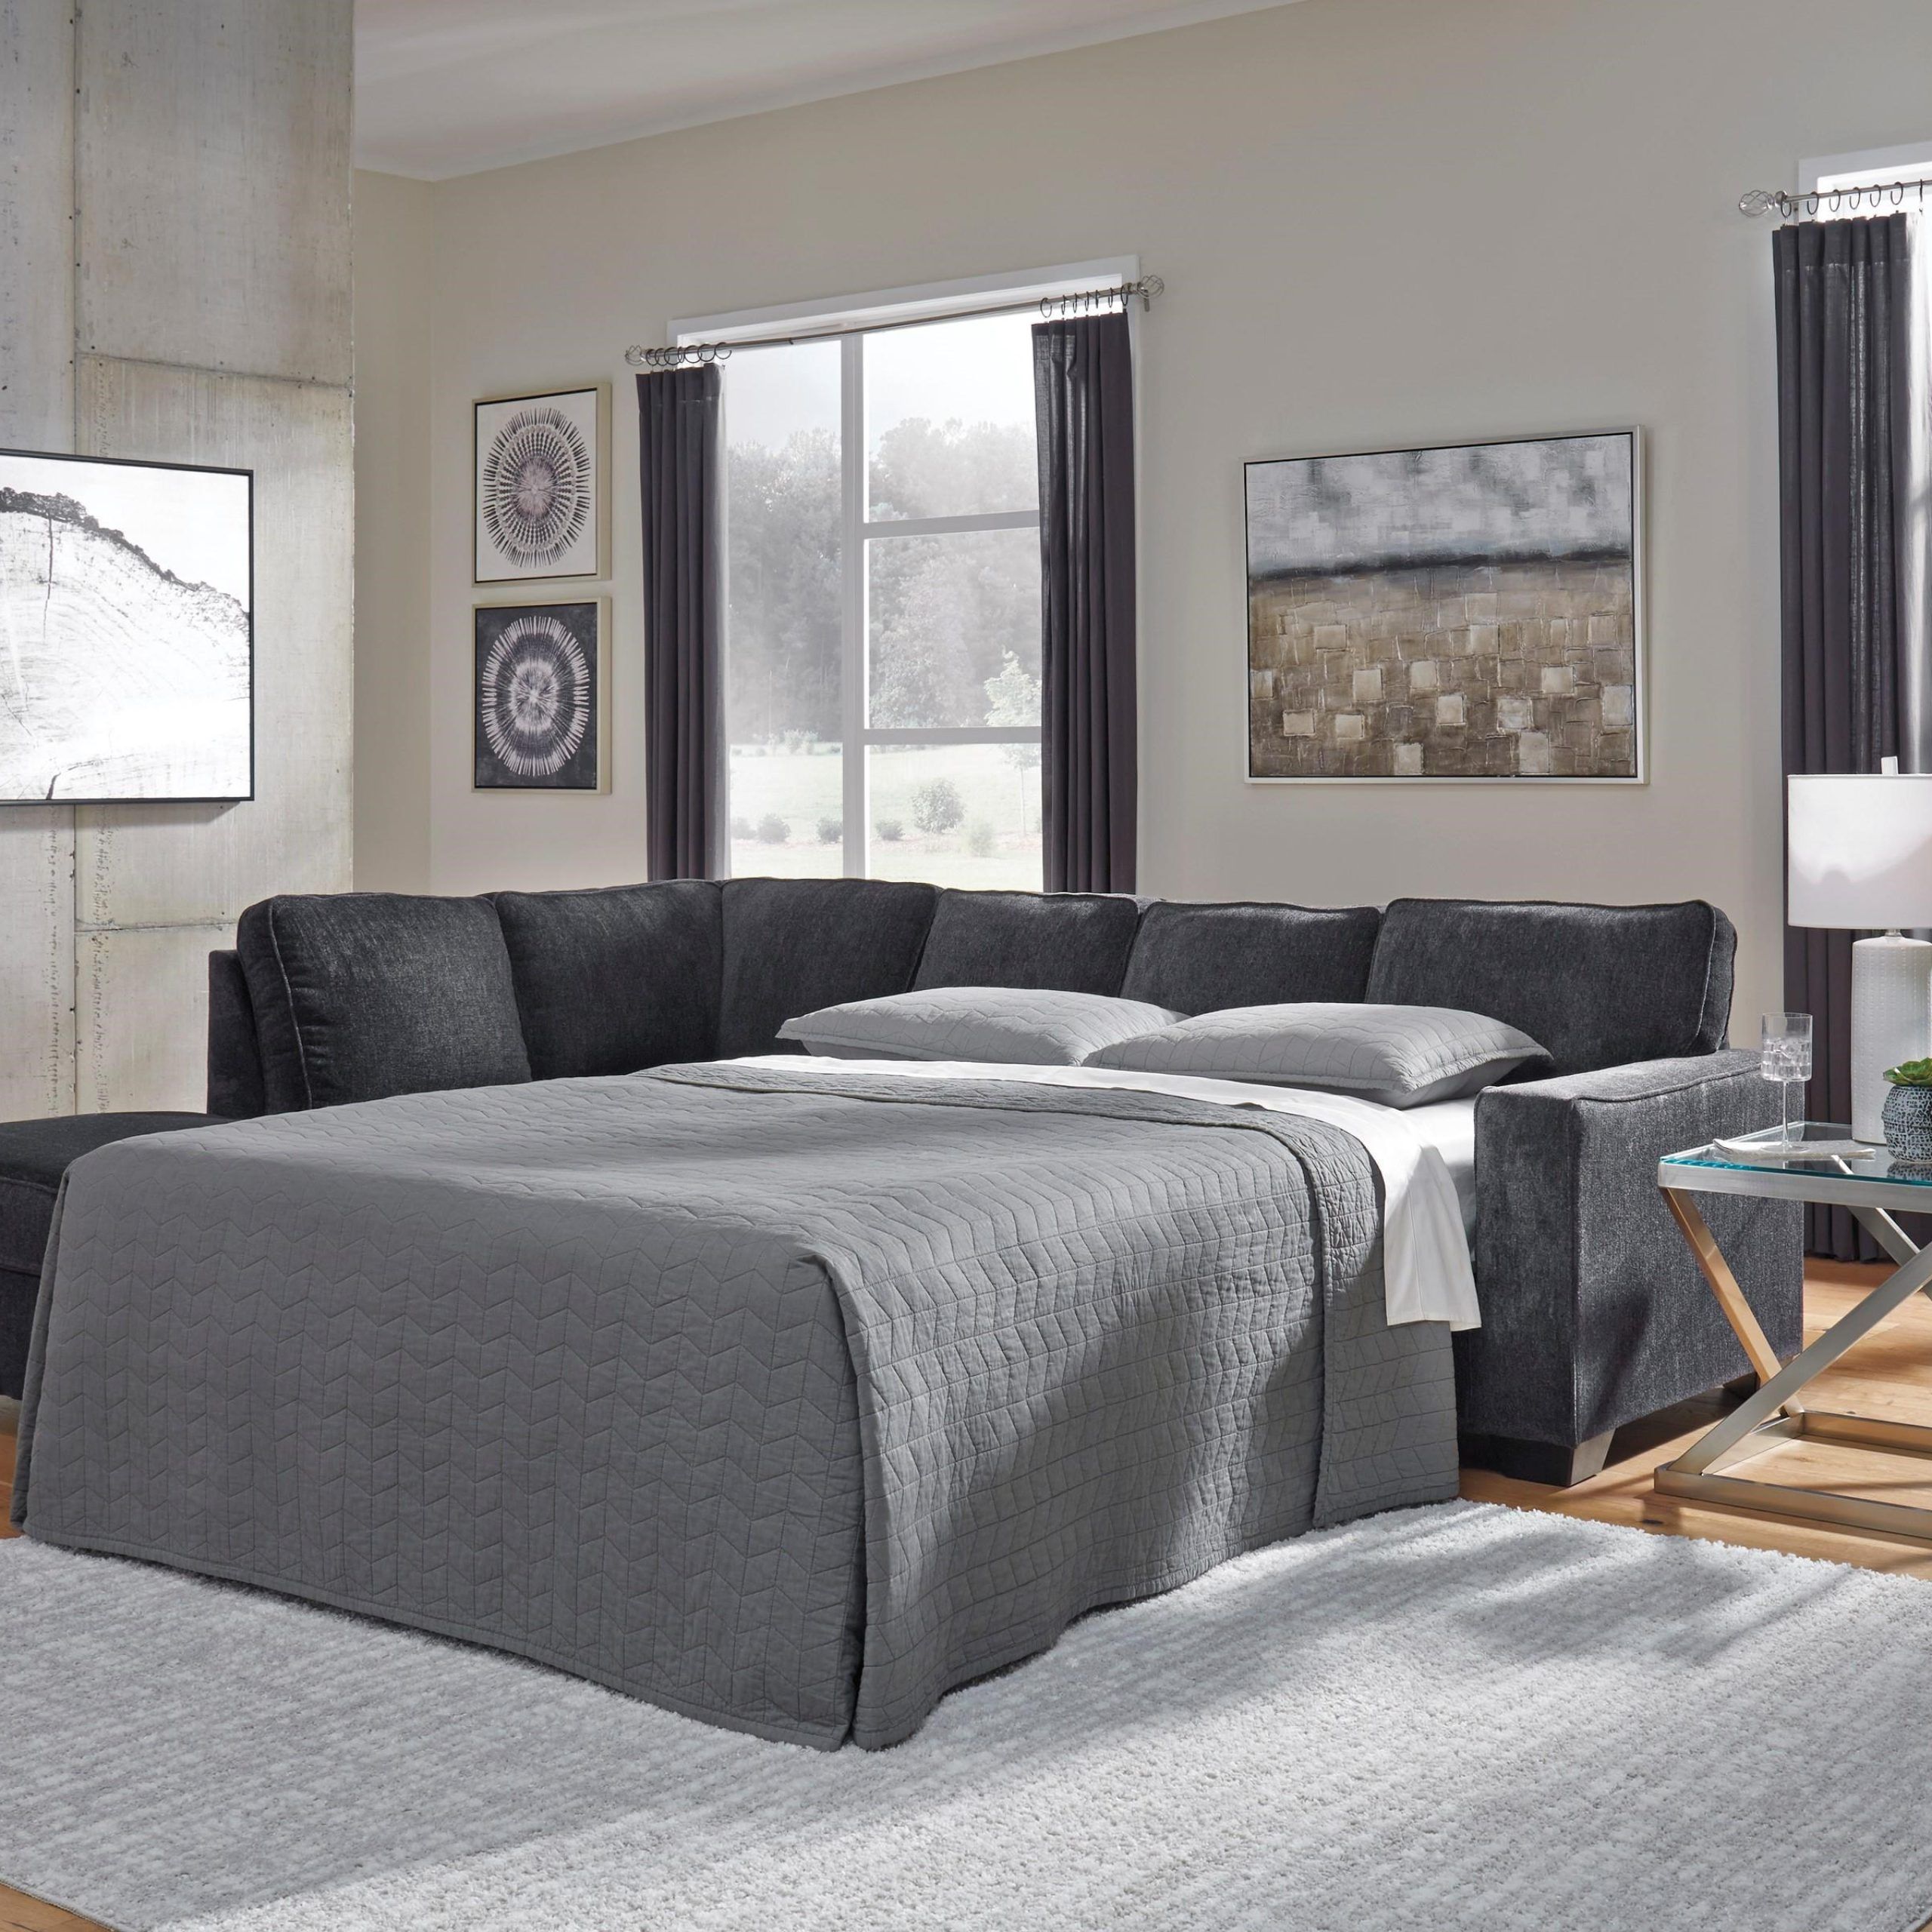 Popular Signature Designashley Altari 805372163 2 Piece Left Arm Facing Intended For Left Or Right Facing Sleeper Sectionals (Photo 3 of 15)